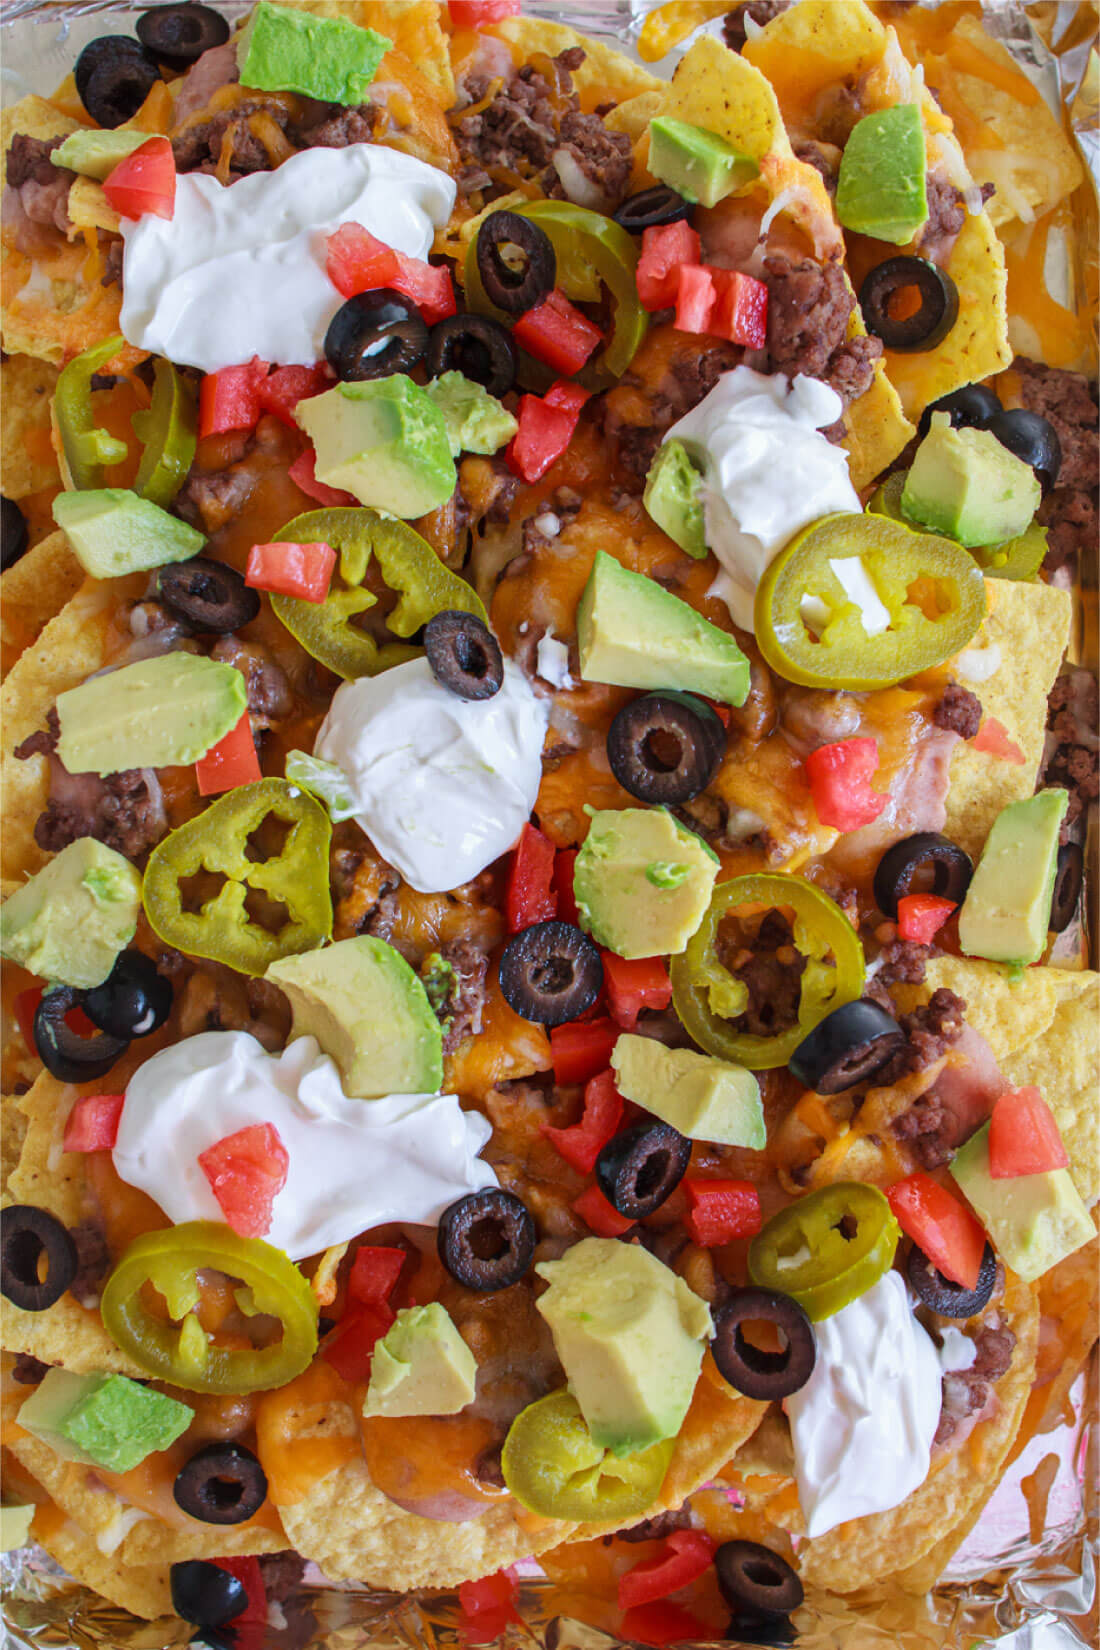 rand accu waterbestendig How to Make Nachos in Oven | Easy Recipe from 30daysblog